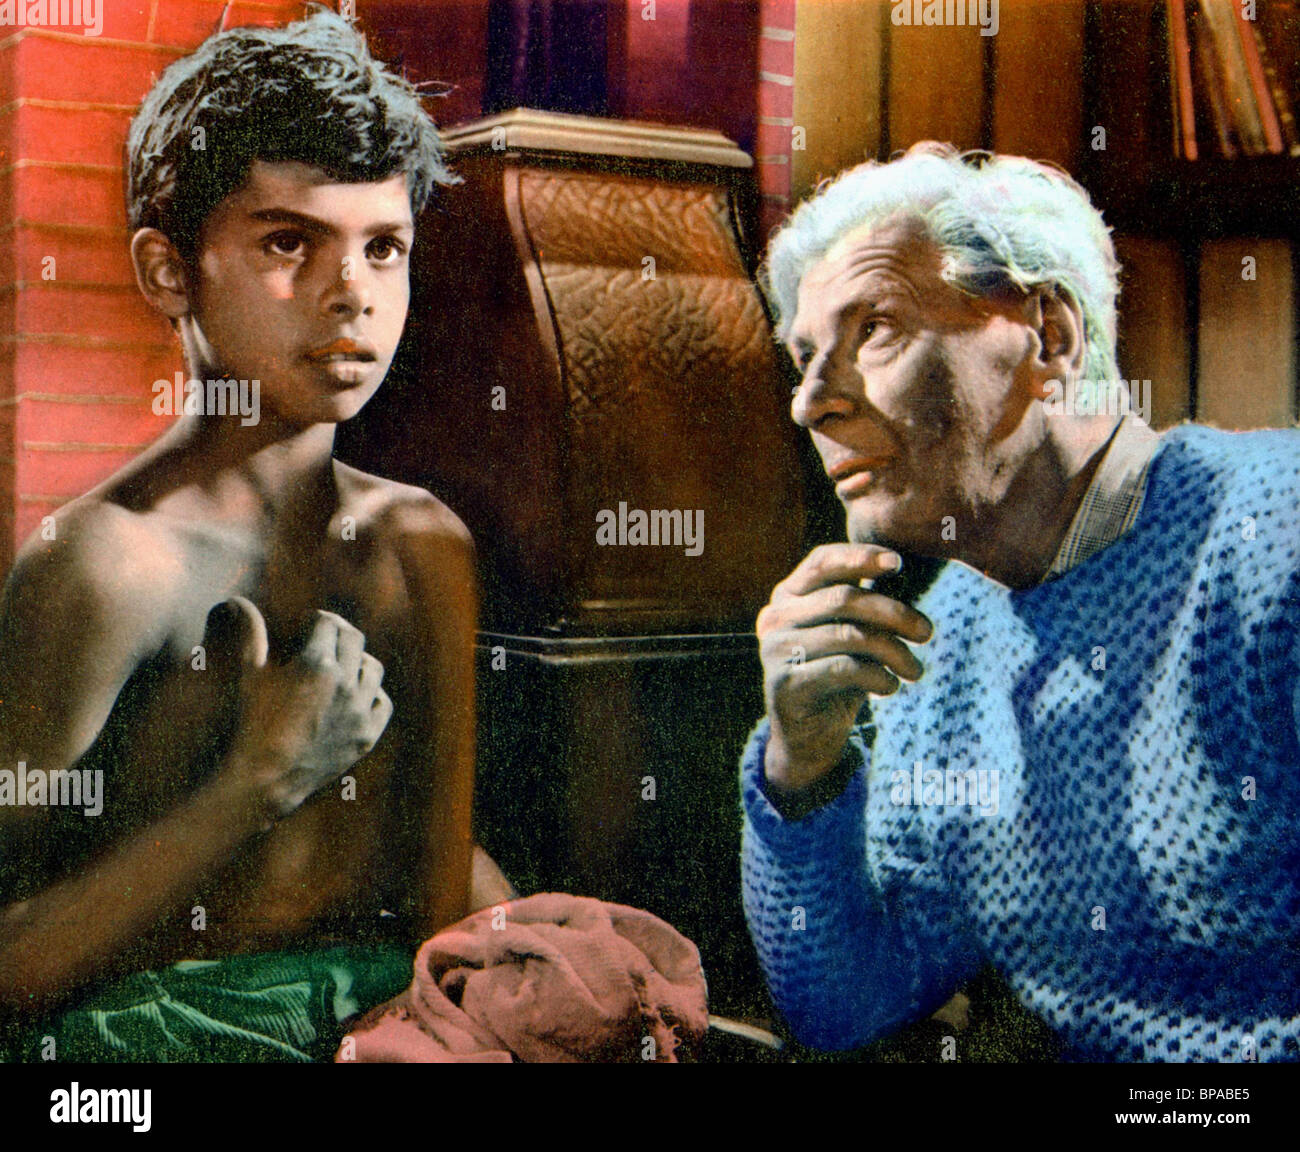 JIMMY STERMAN, EDVIN ADOLPHSON, BOY OF TWO WORLDS, 1959 Stock Photo - Alamy